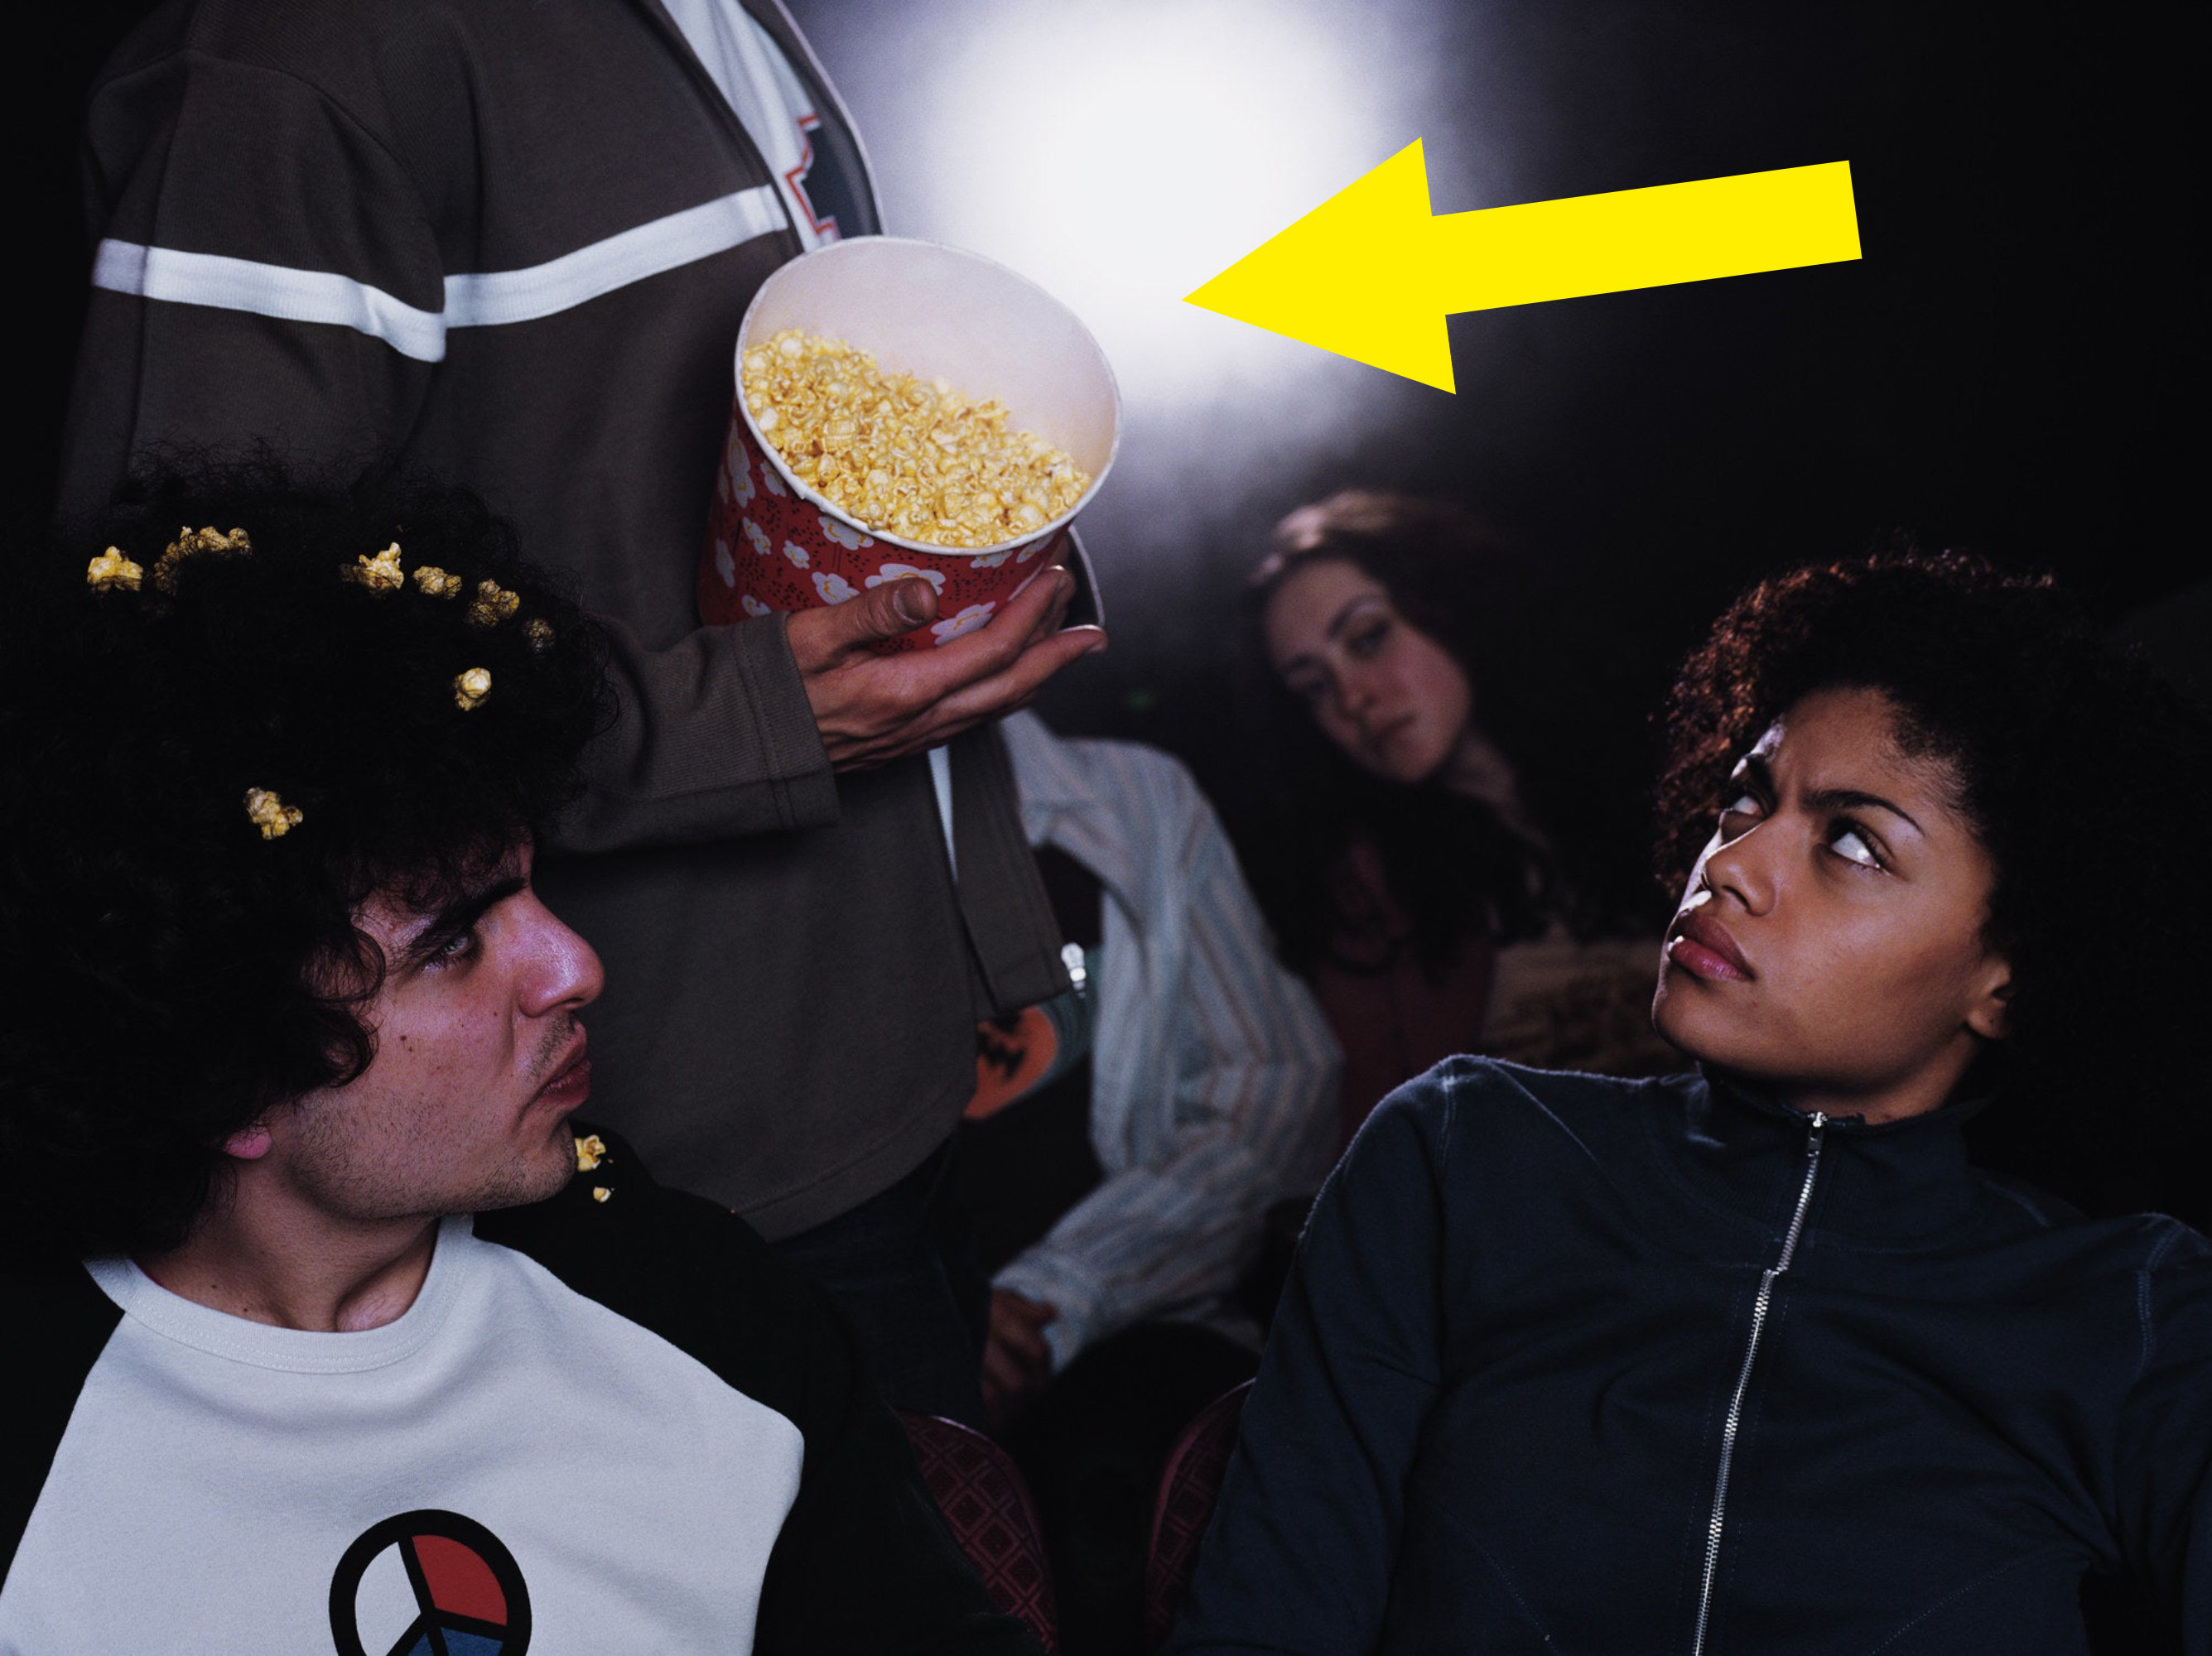 At a movie theater, two people look annoyed as someone passes by and spills popcorn on them